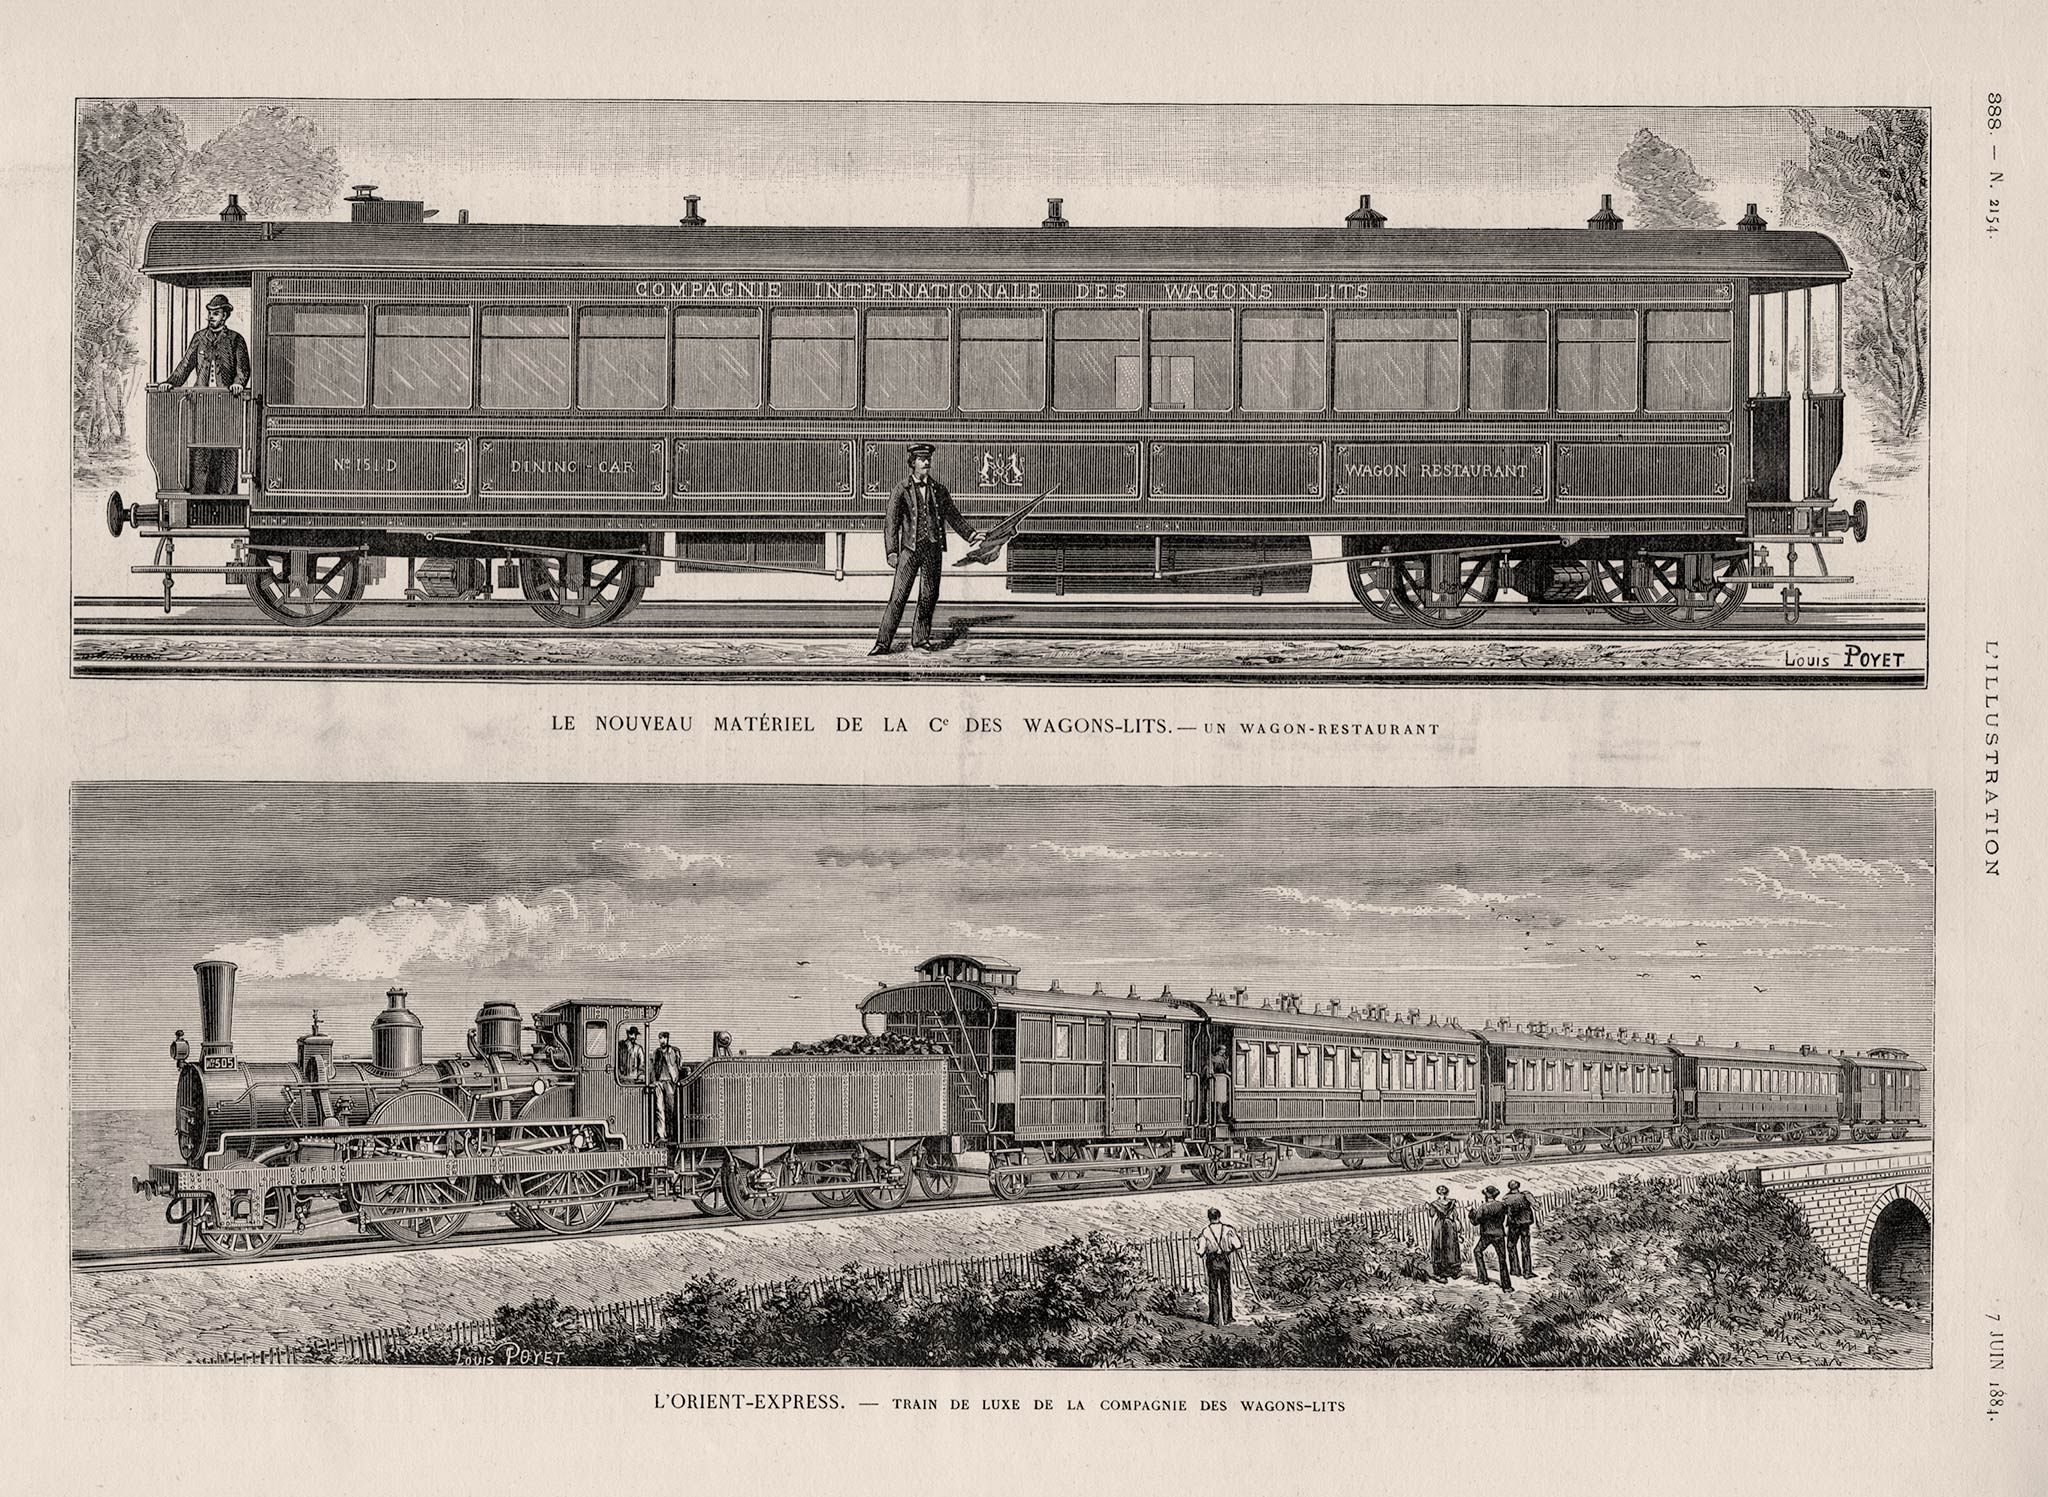 An Illustrated History of the Orient Express - Atlas Obscura